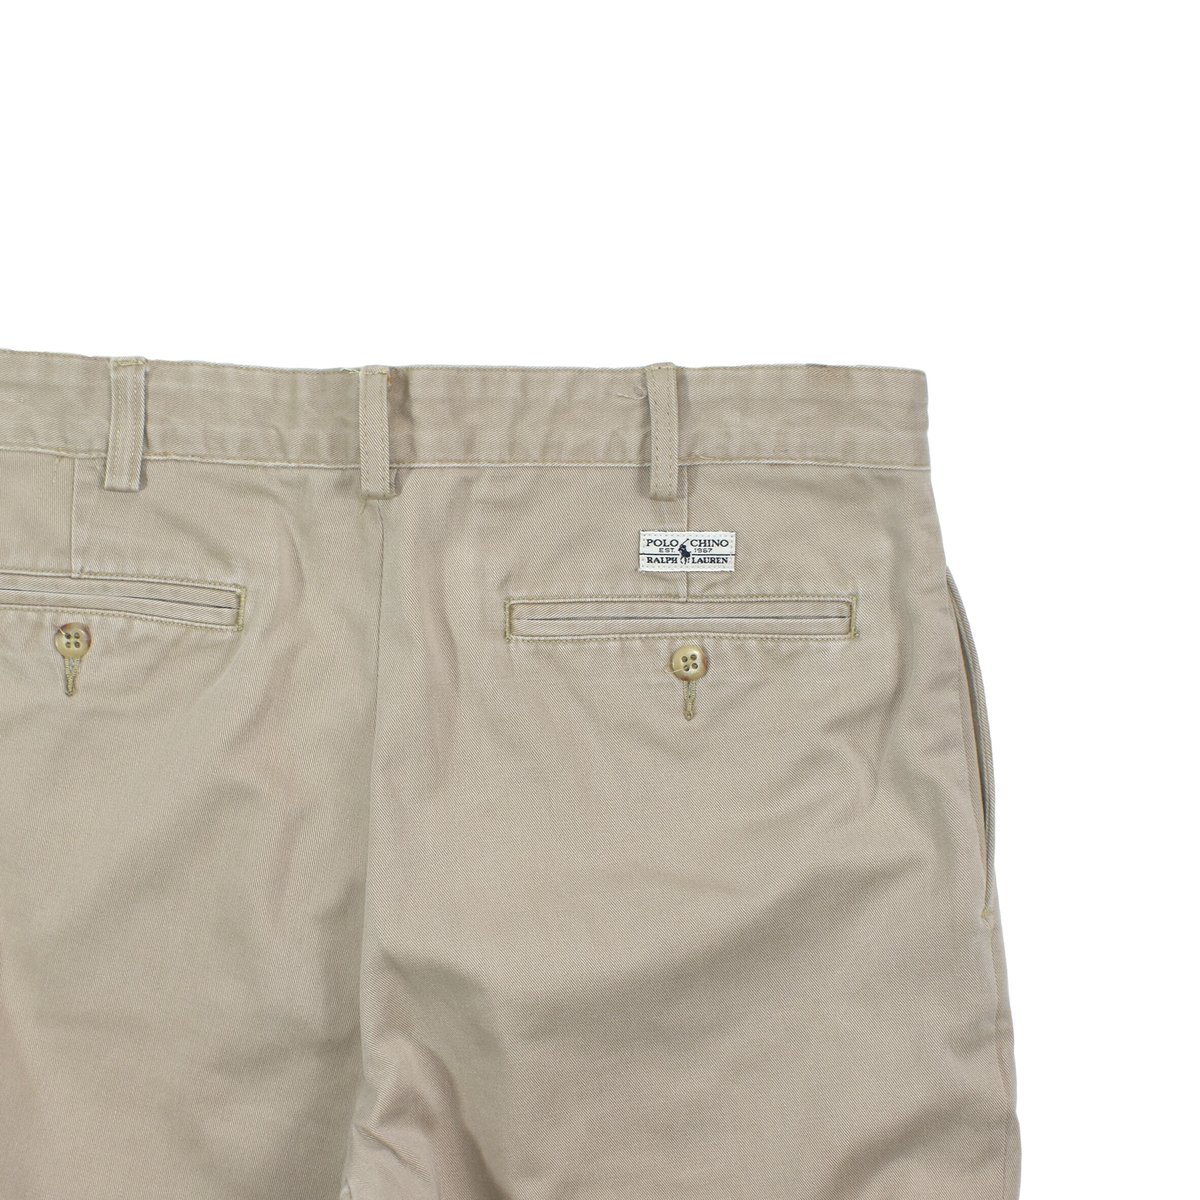 USED "POLO RALPH LAUREN" CHINO PANTS | DAILY DO...